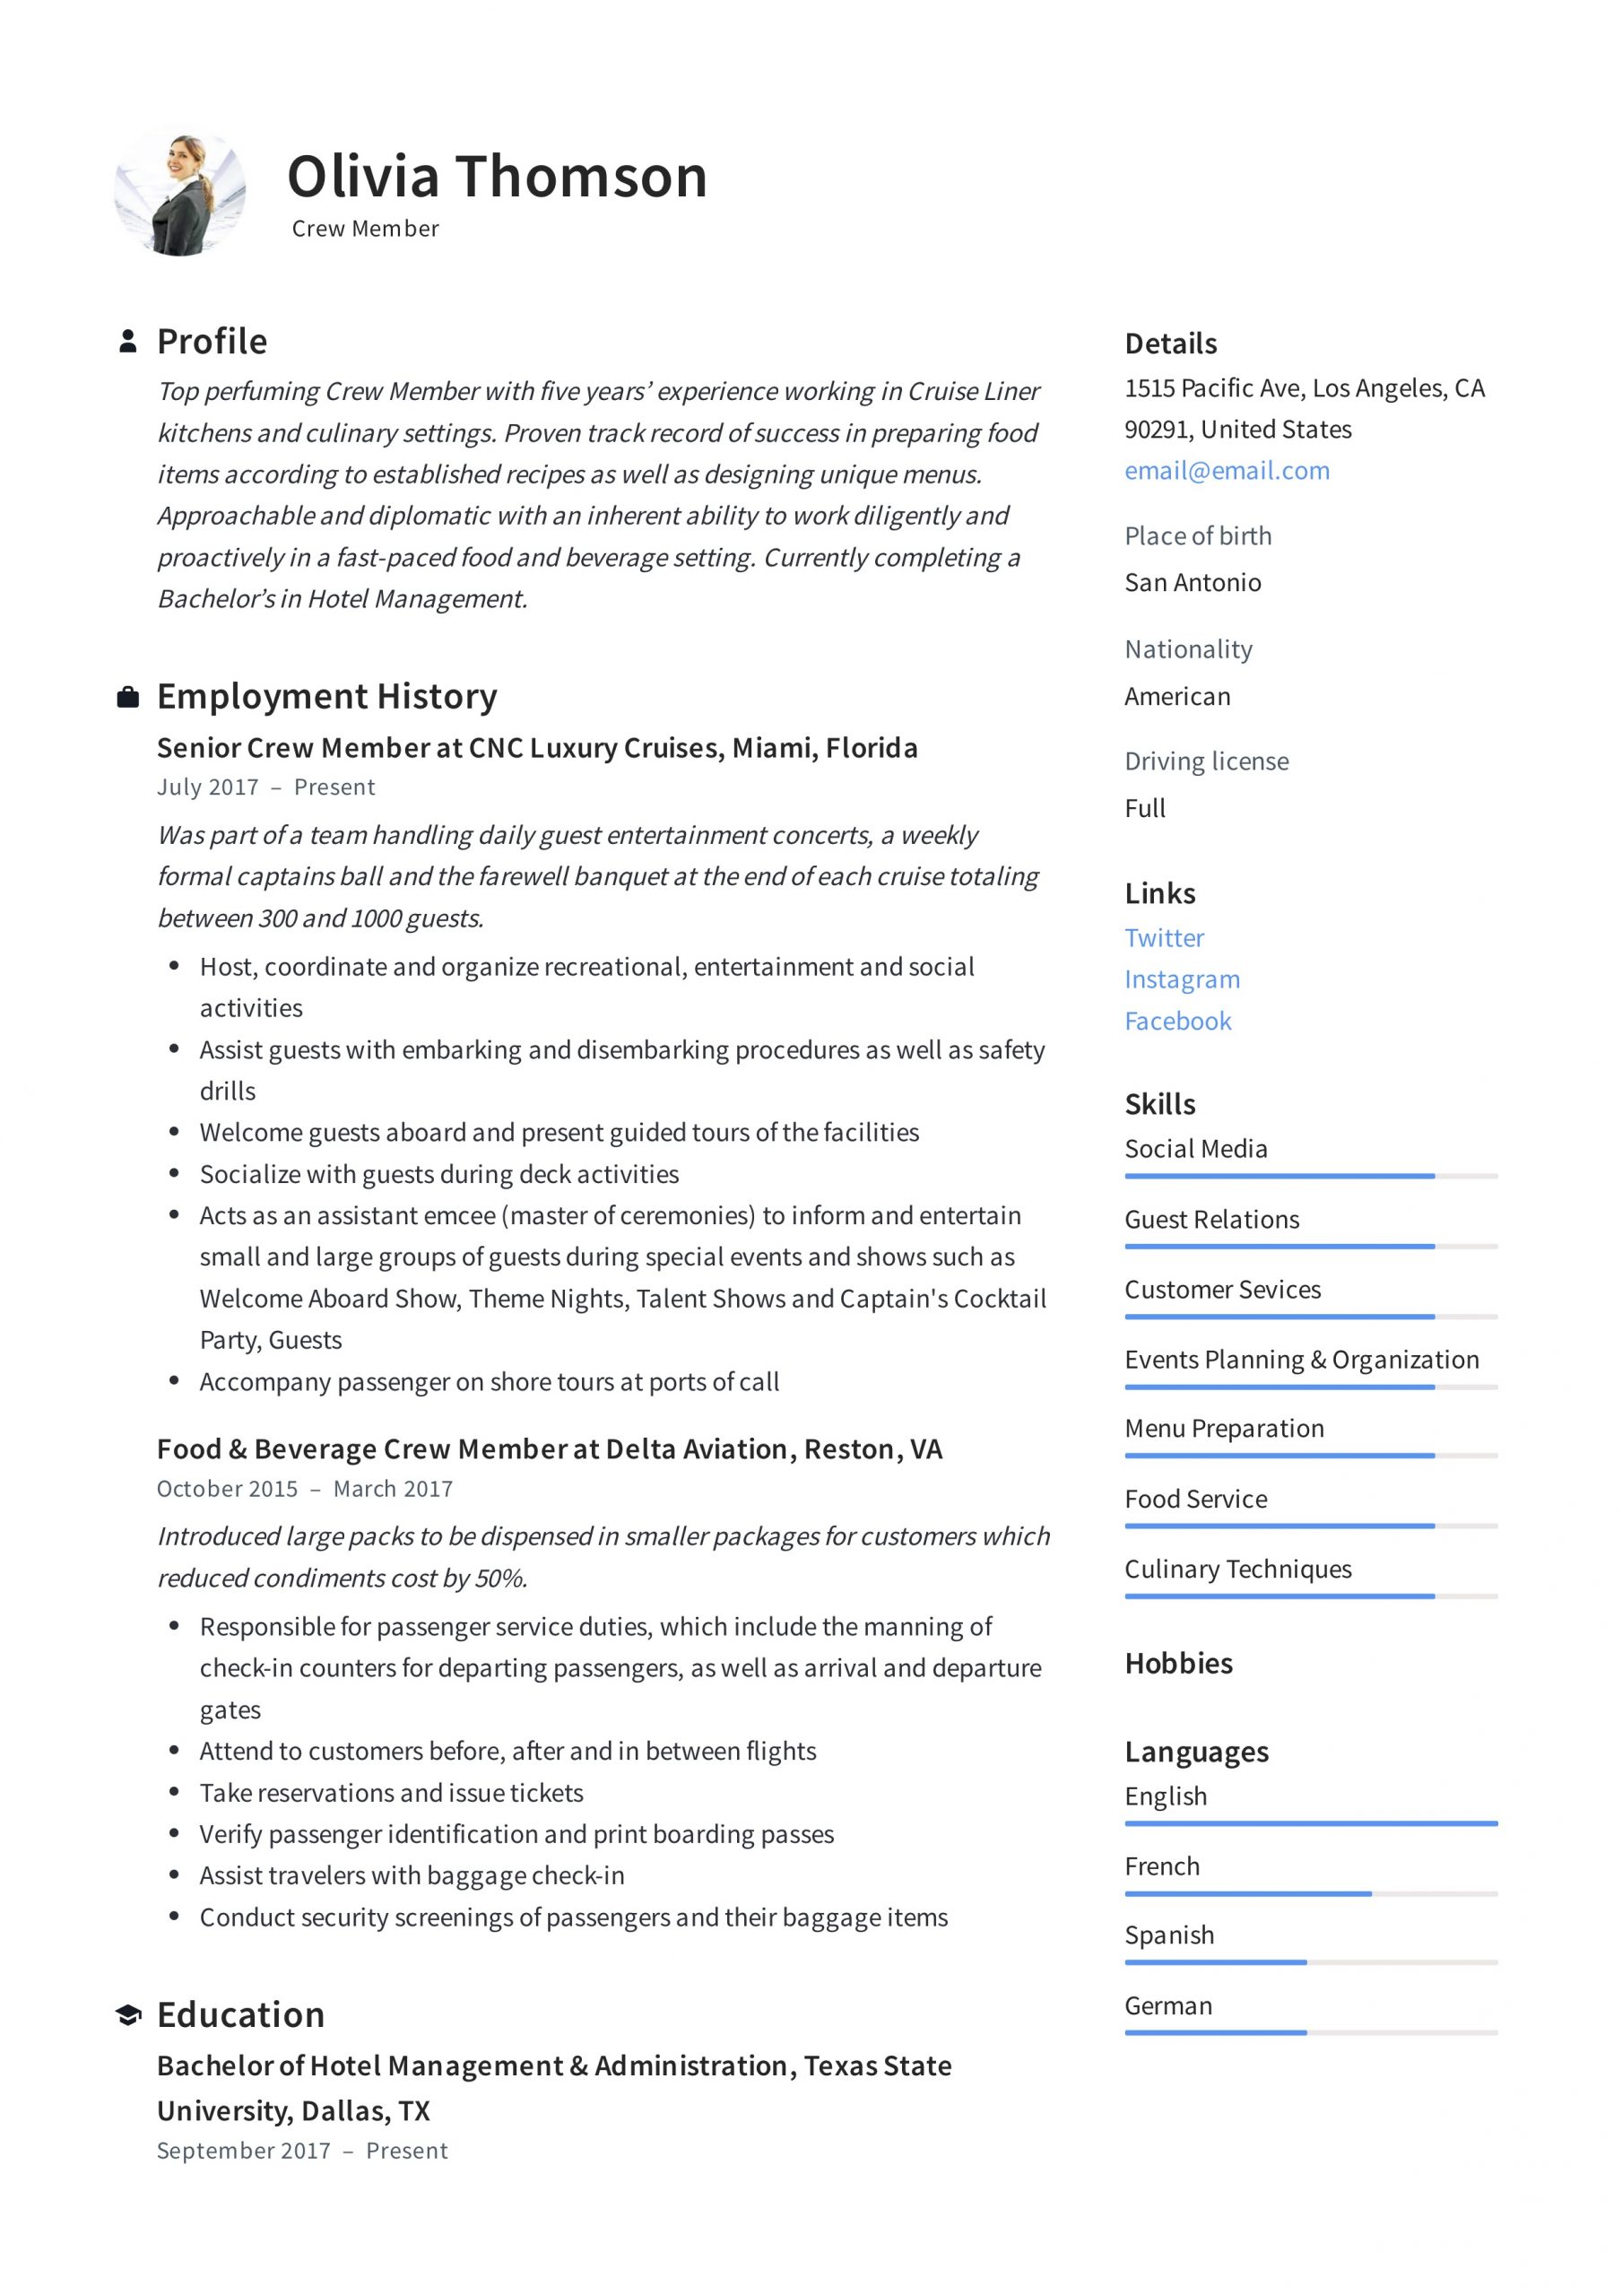 Crew Member Resume Writing Guide Download 12 Examples 2020 inside dimensions 2478 X 3507